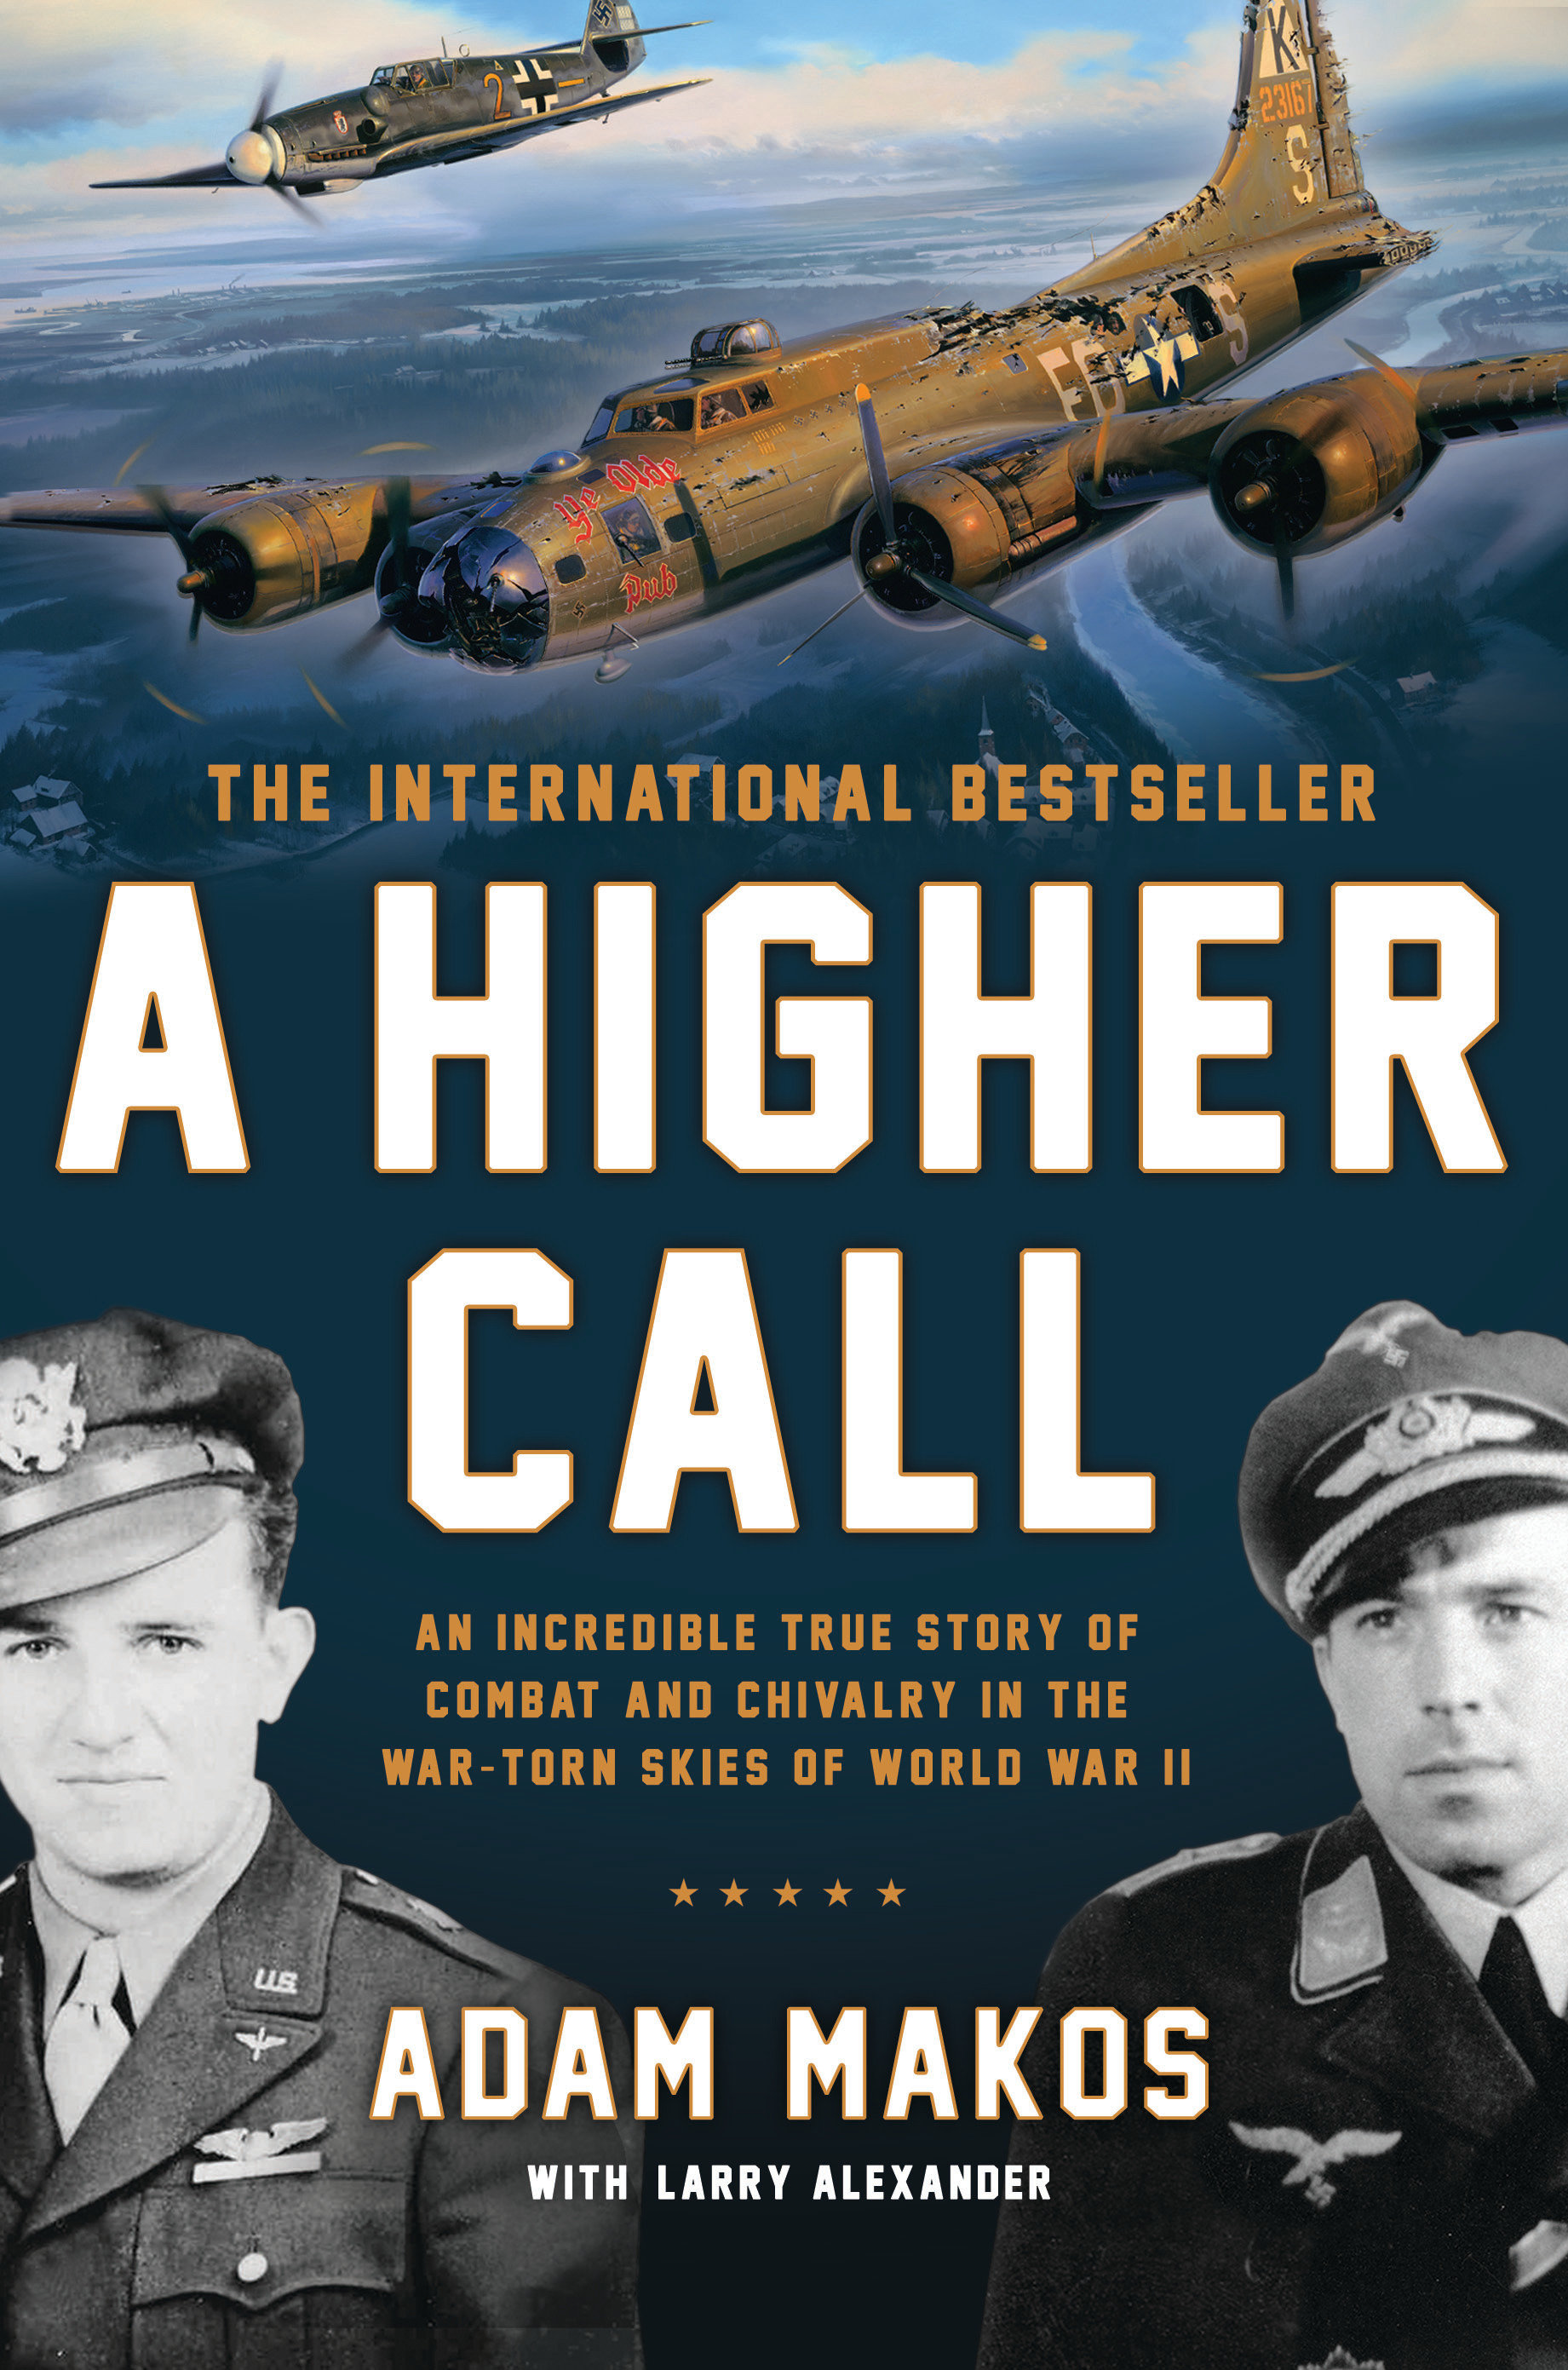 A higher call [an incredible true story of combat and chivalry in the war-torn skies of World War II] cover image